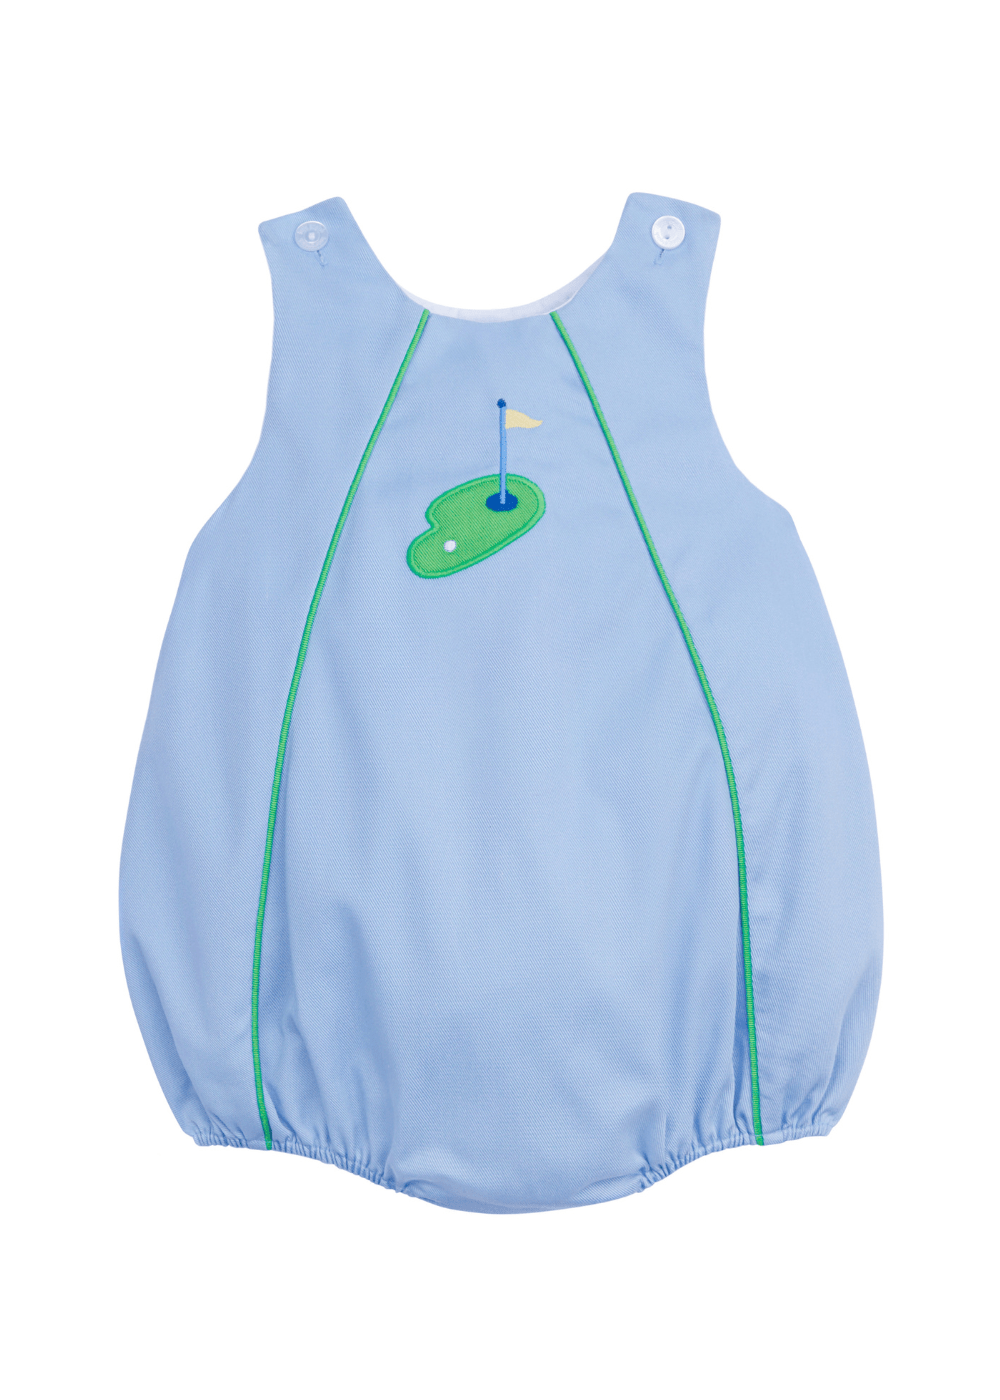 classic childrens clothing boys light blue bubble with green golf applique